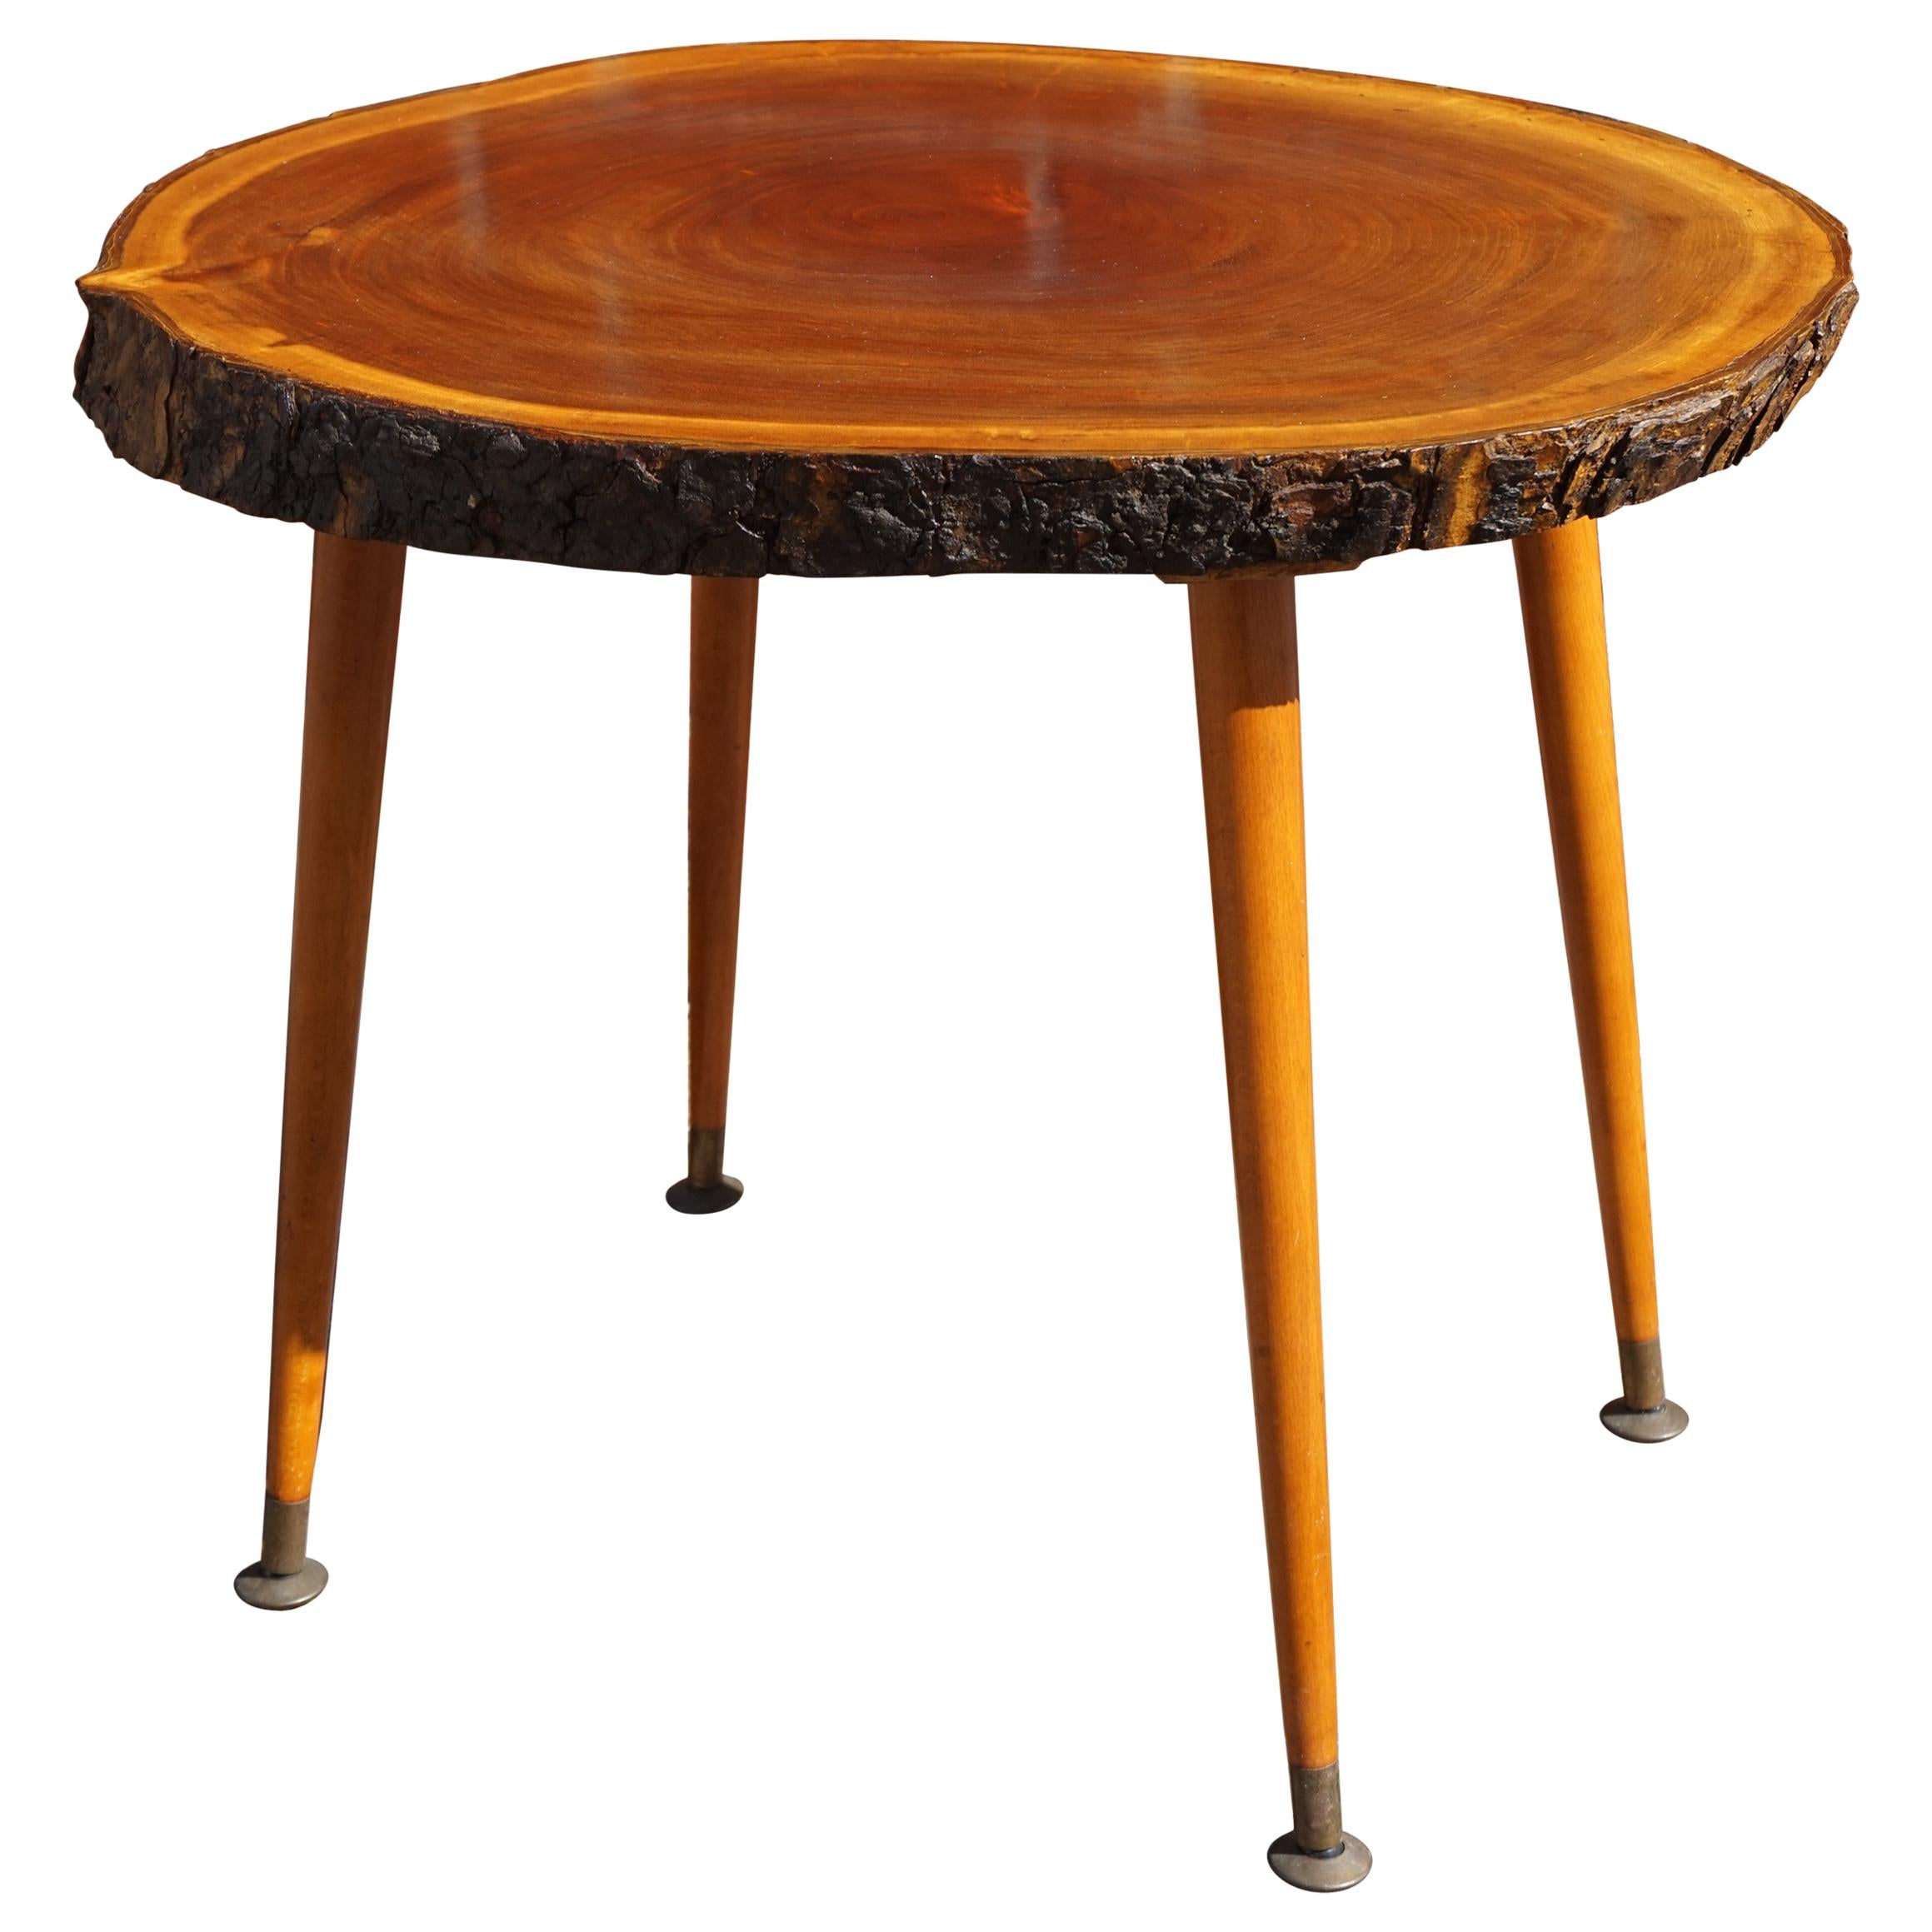 Midcentury Made Organic Modern Wine or End Table with Walnut & Bark Table Top For Sale